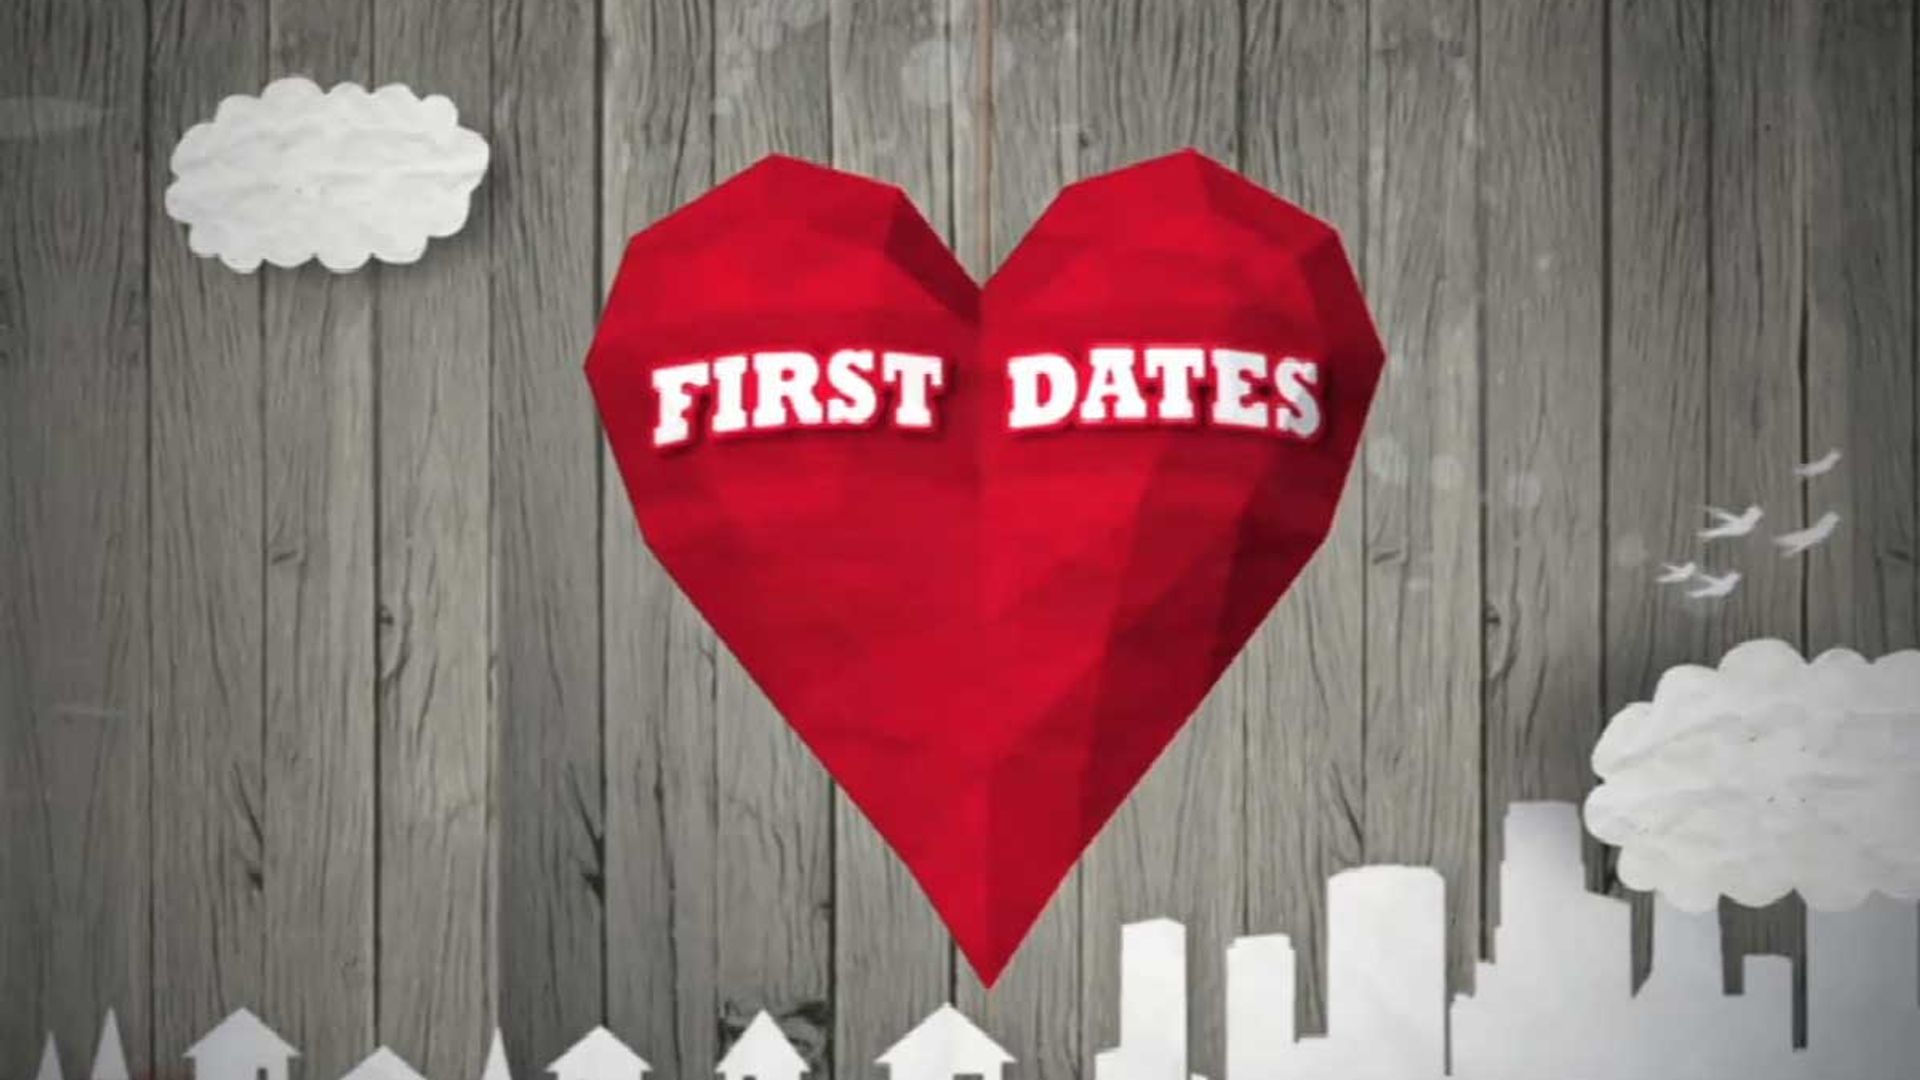 First Dates star reveals positive test for coronavirus and details symptoms